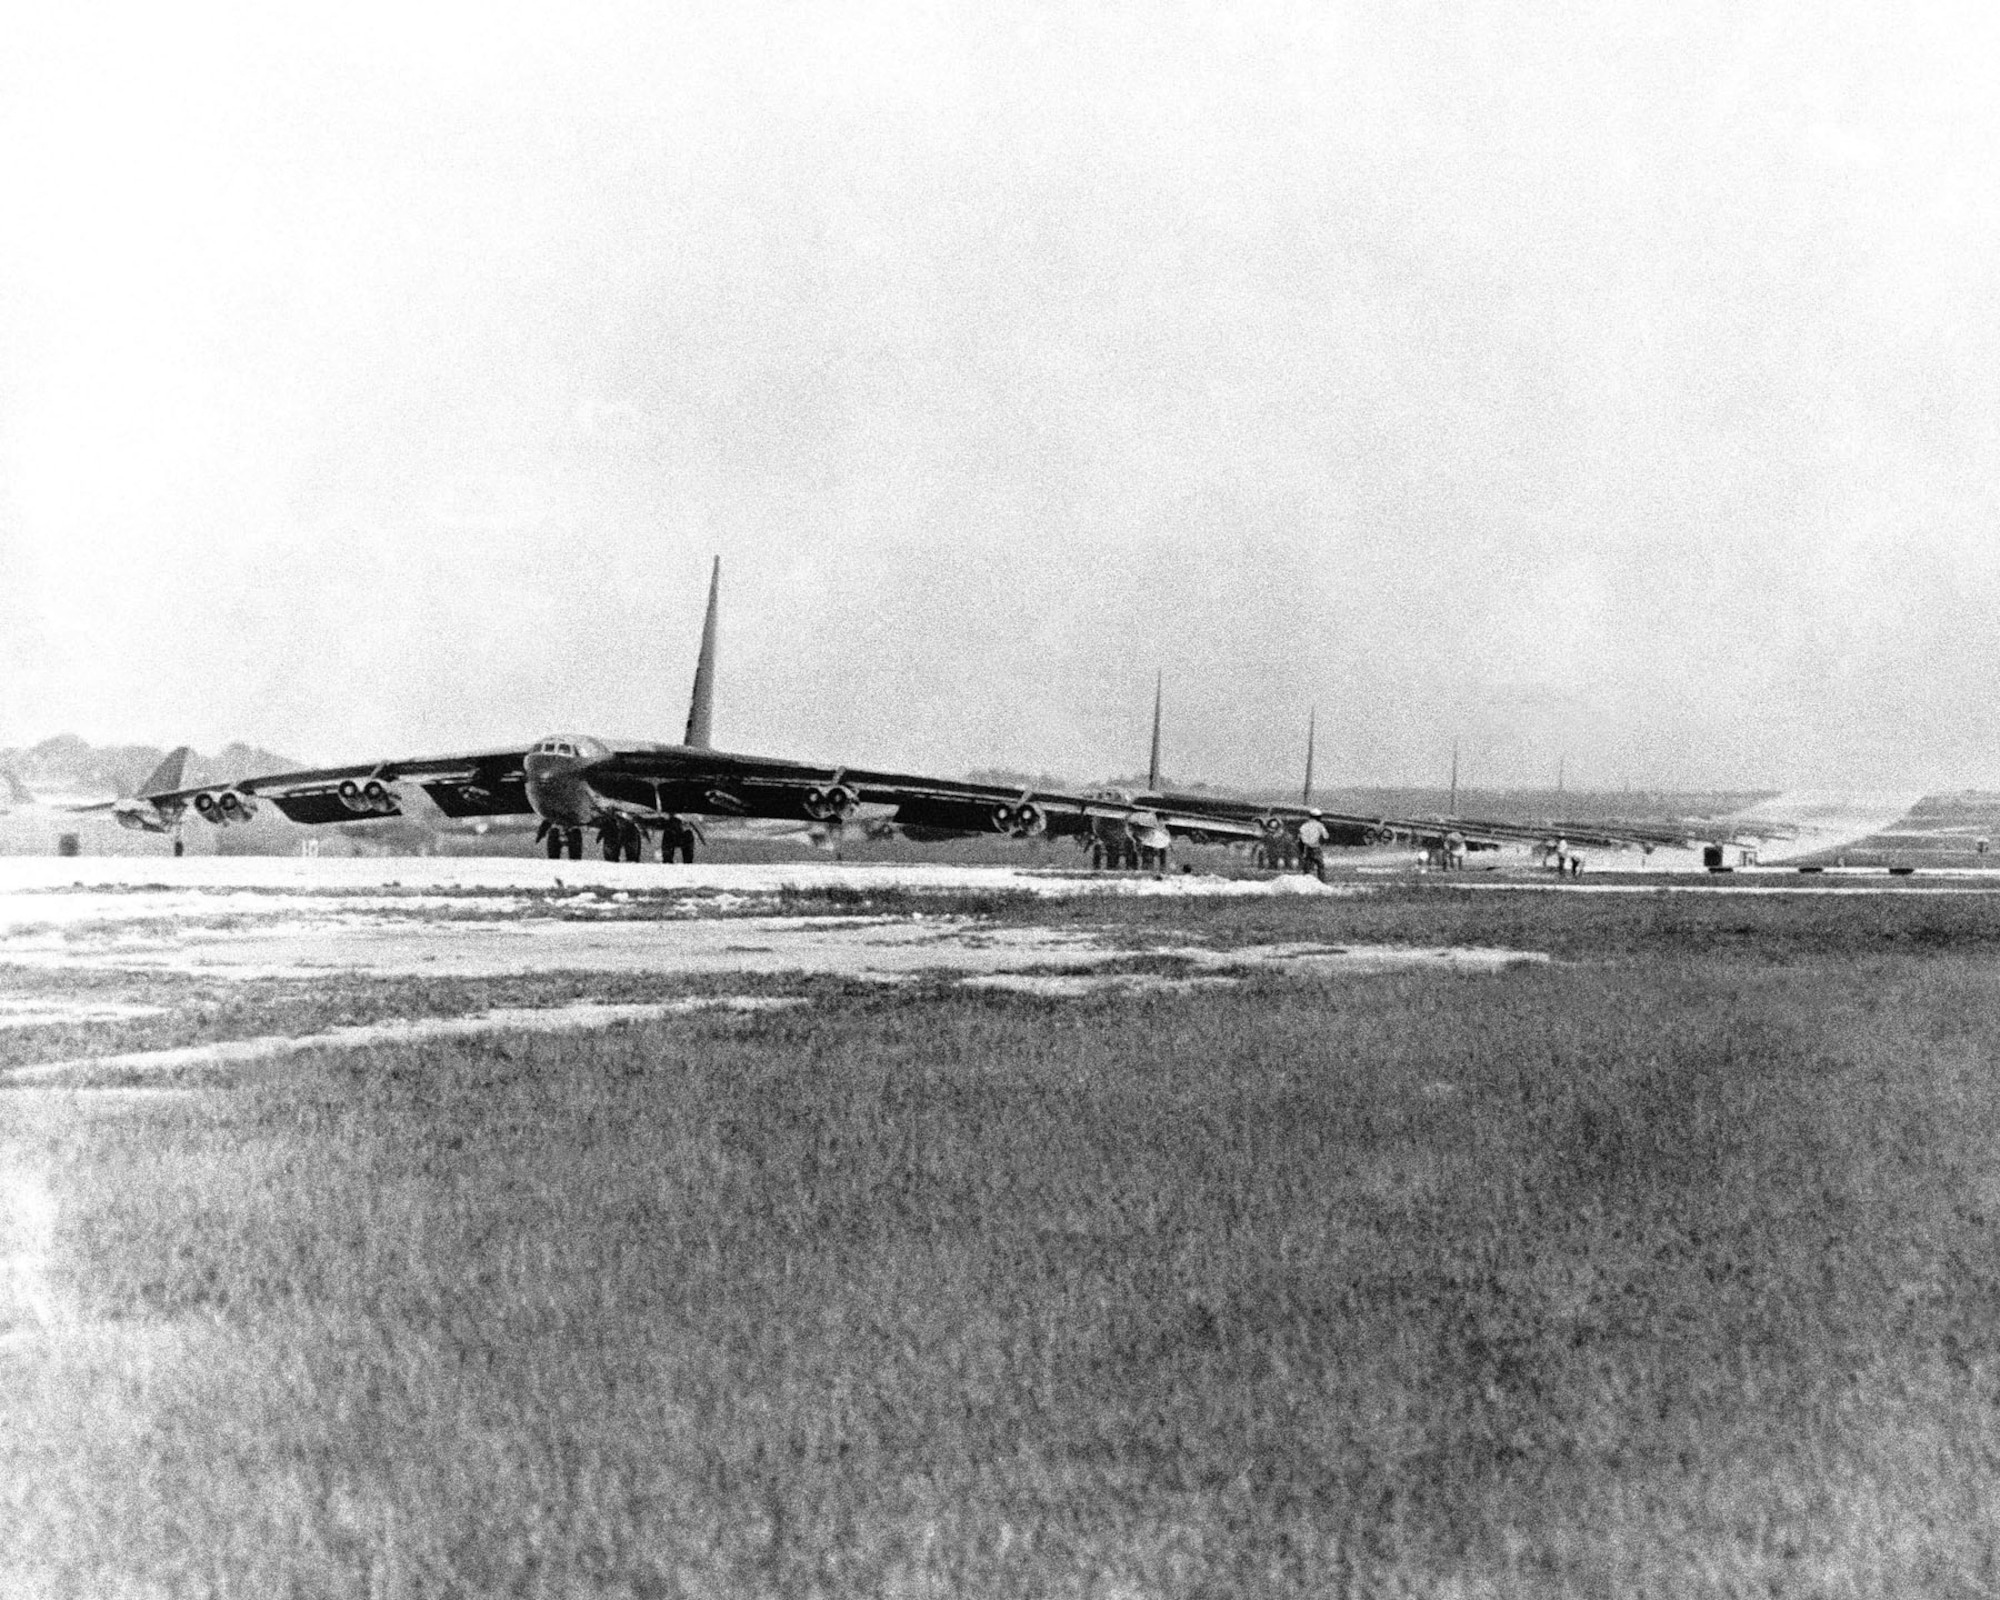 B-52Ds from the Strategic Air Command line up for takeoff as they prepare for strikes over Hanoi and Haiphong, North Vietnam, during OPERATION LINEBACKER. (U.S. Air Force photo)